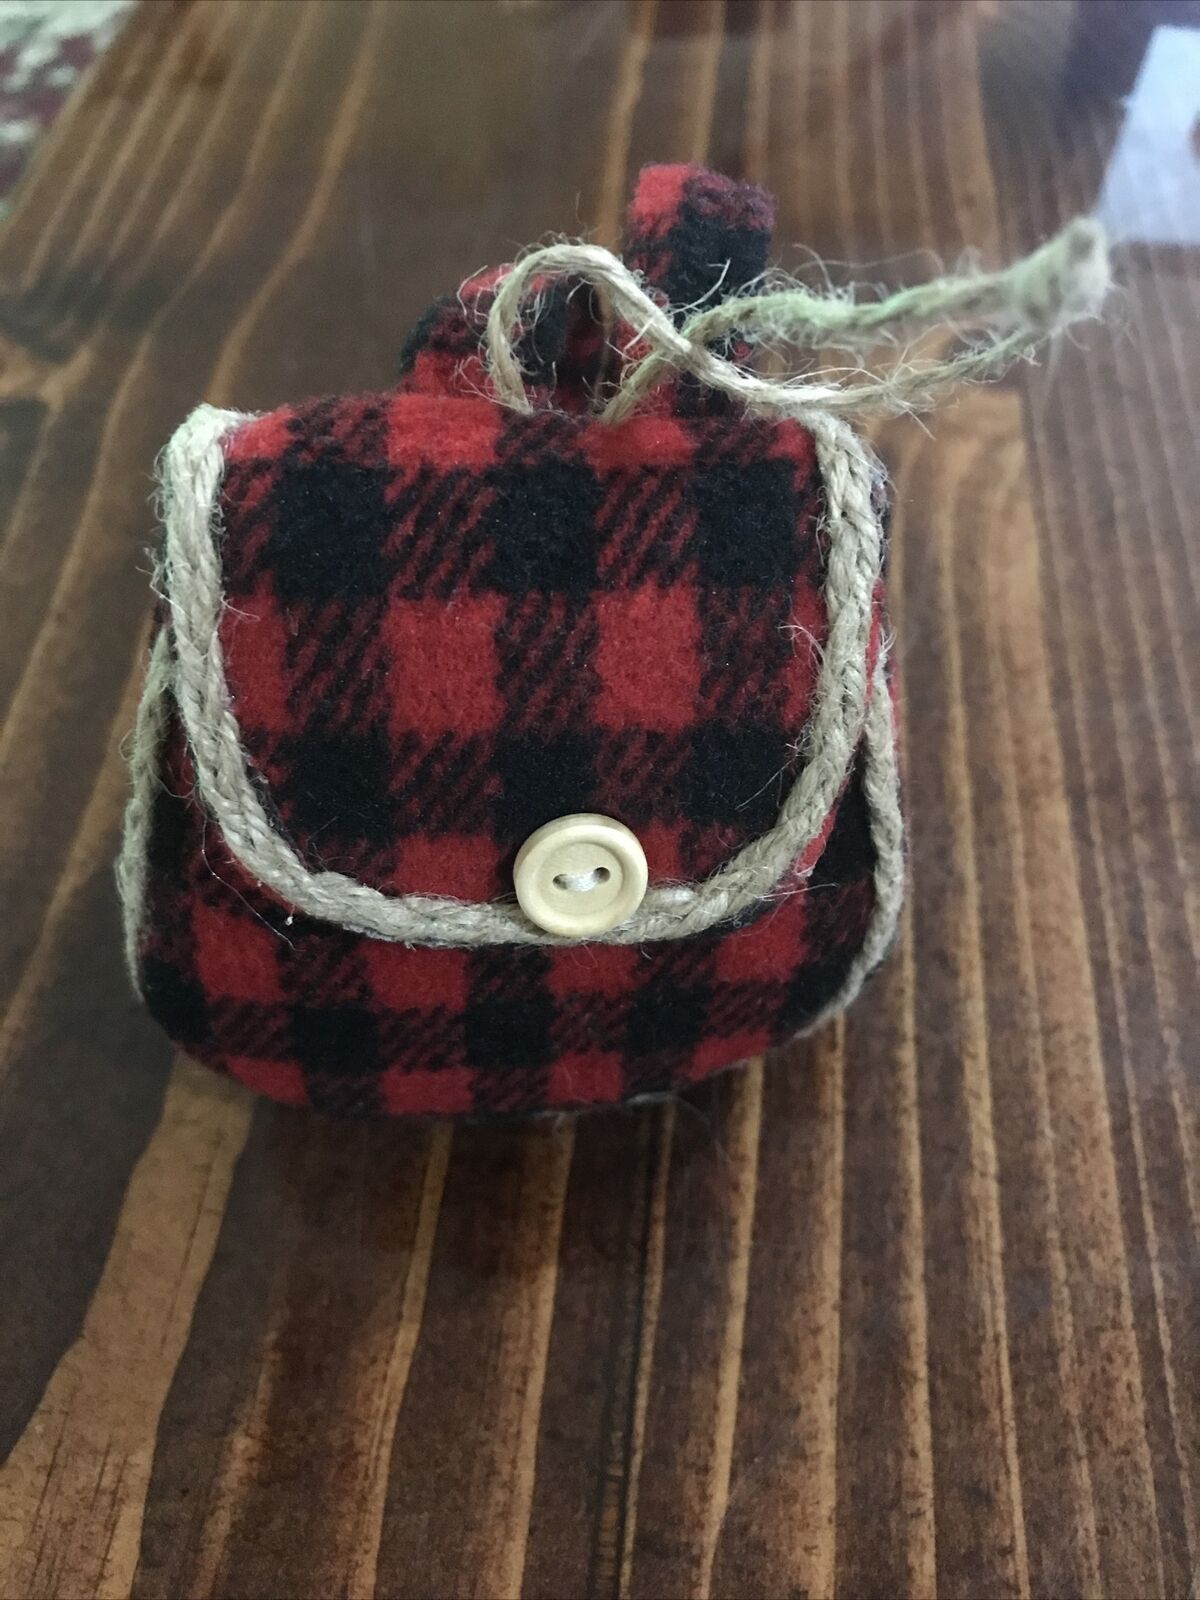 Rustic Plush Black and Red Plush Backpack Christmas Ornament